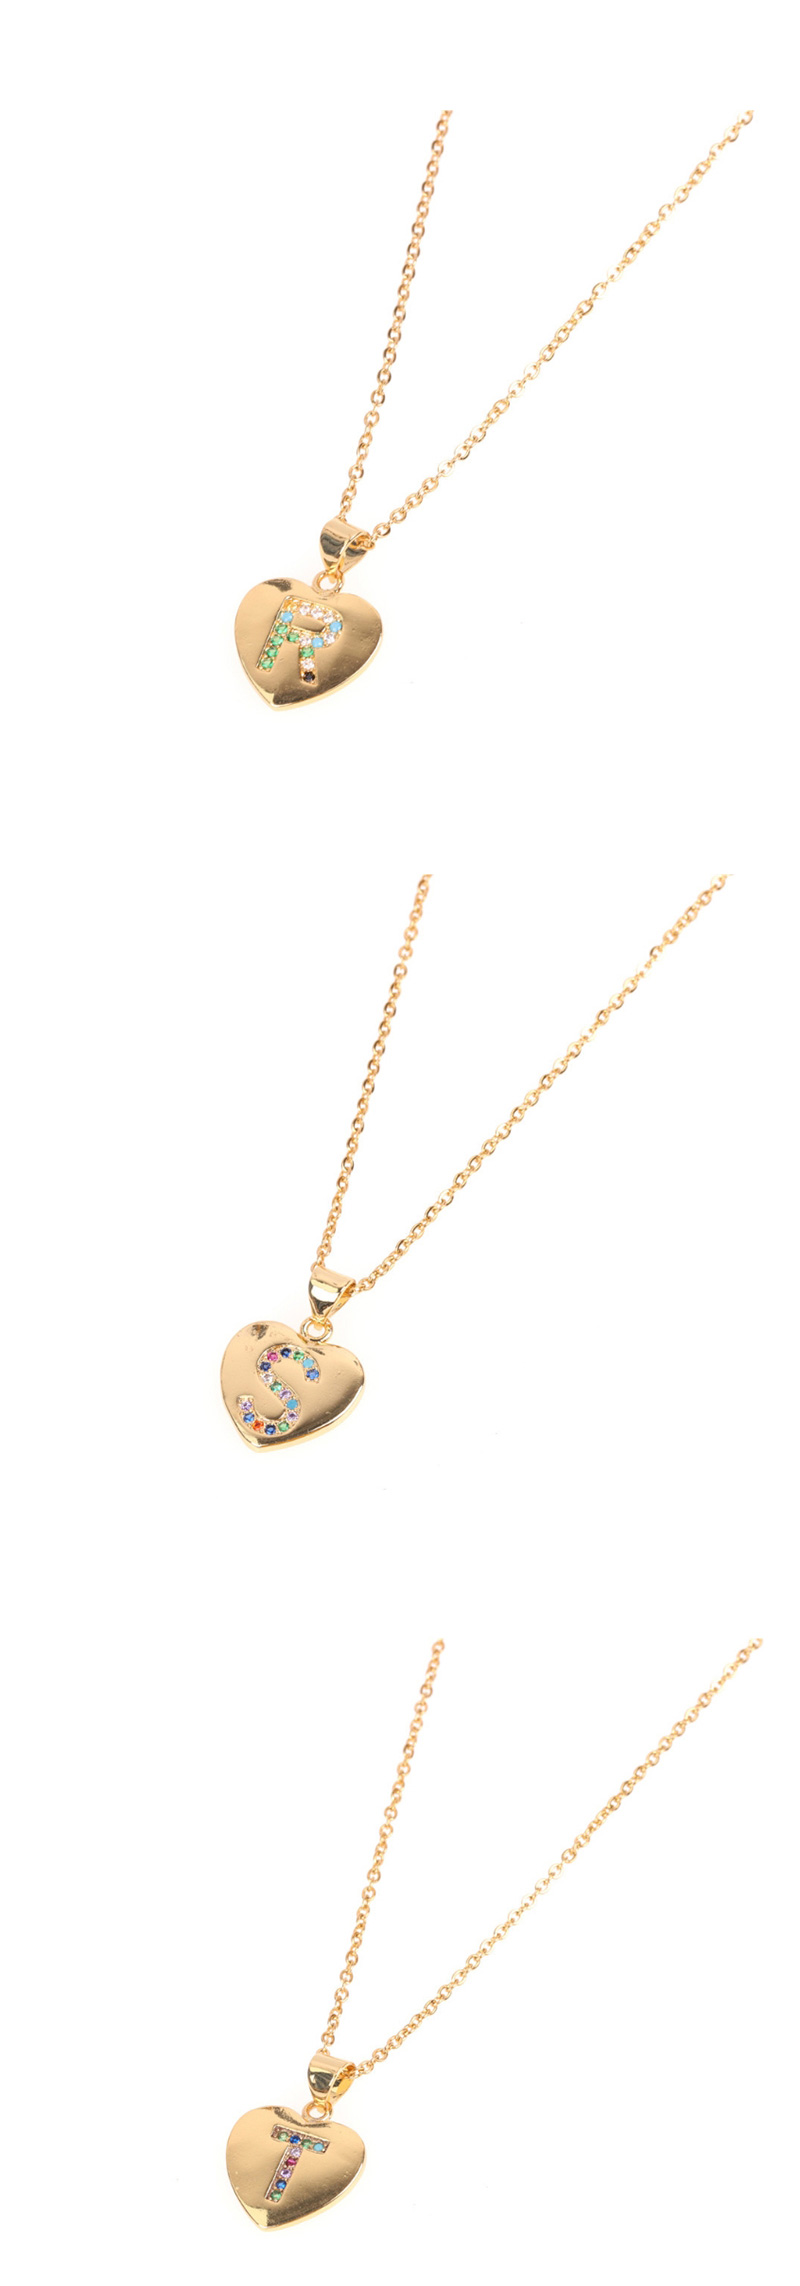 Fashion Golden N Micro Inlaid Zircon Love Letter Necklace,Necklaces